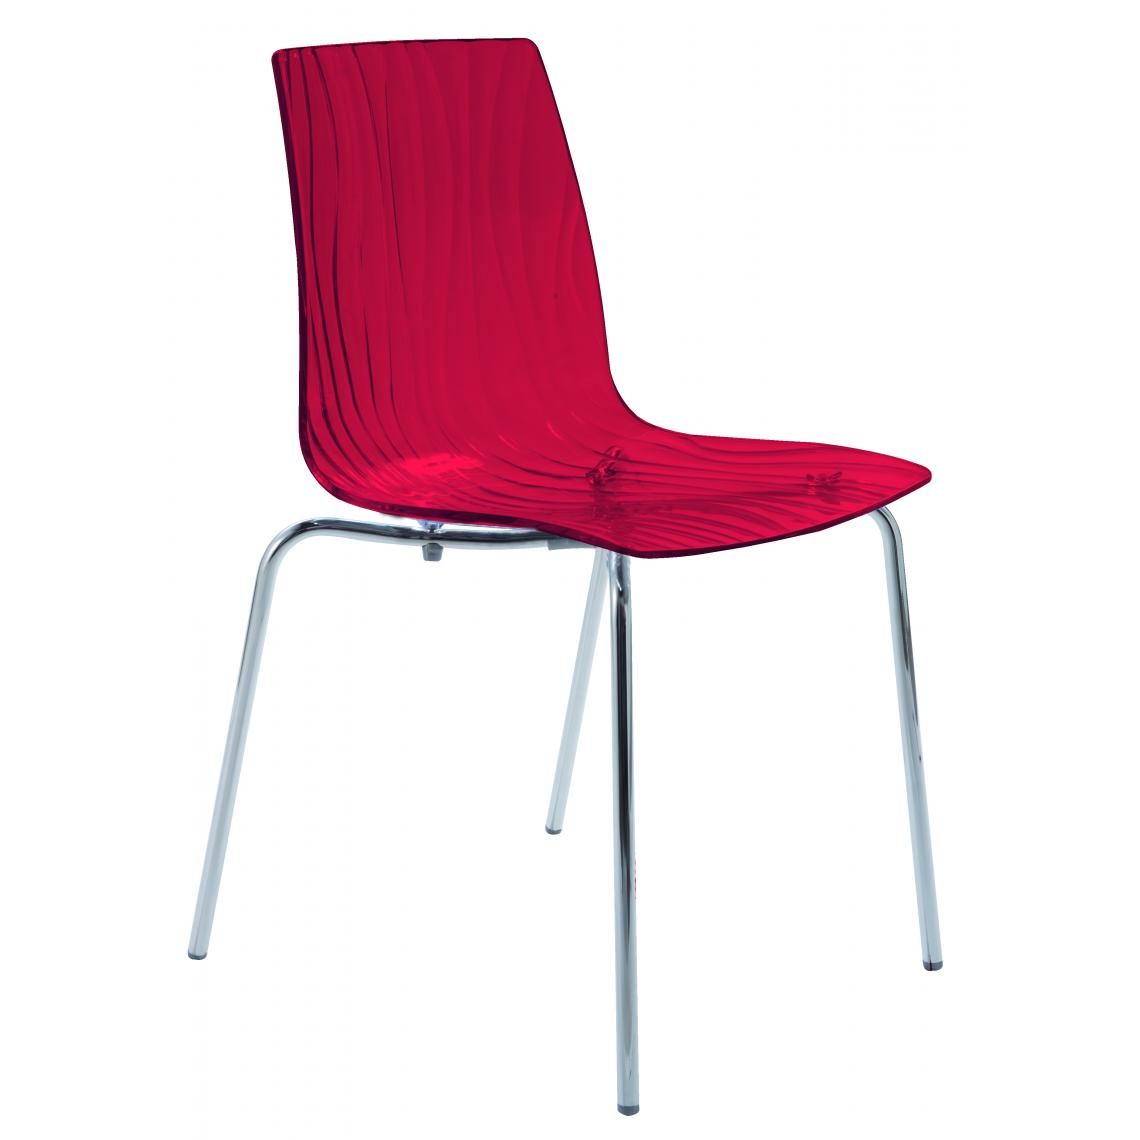 3S. x Home - Chaise Design Transparente Rouge OLYMPIE - Chaises